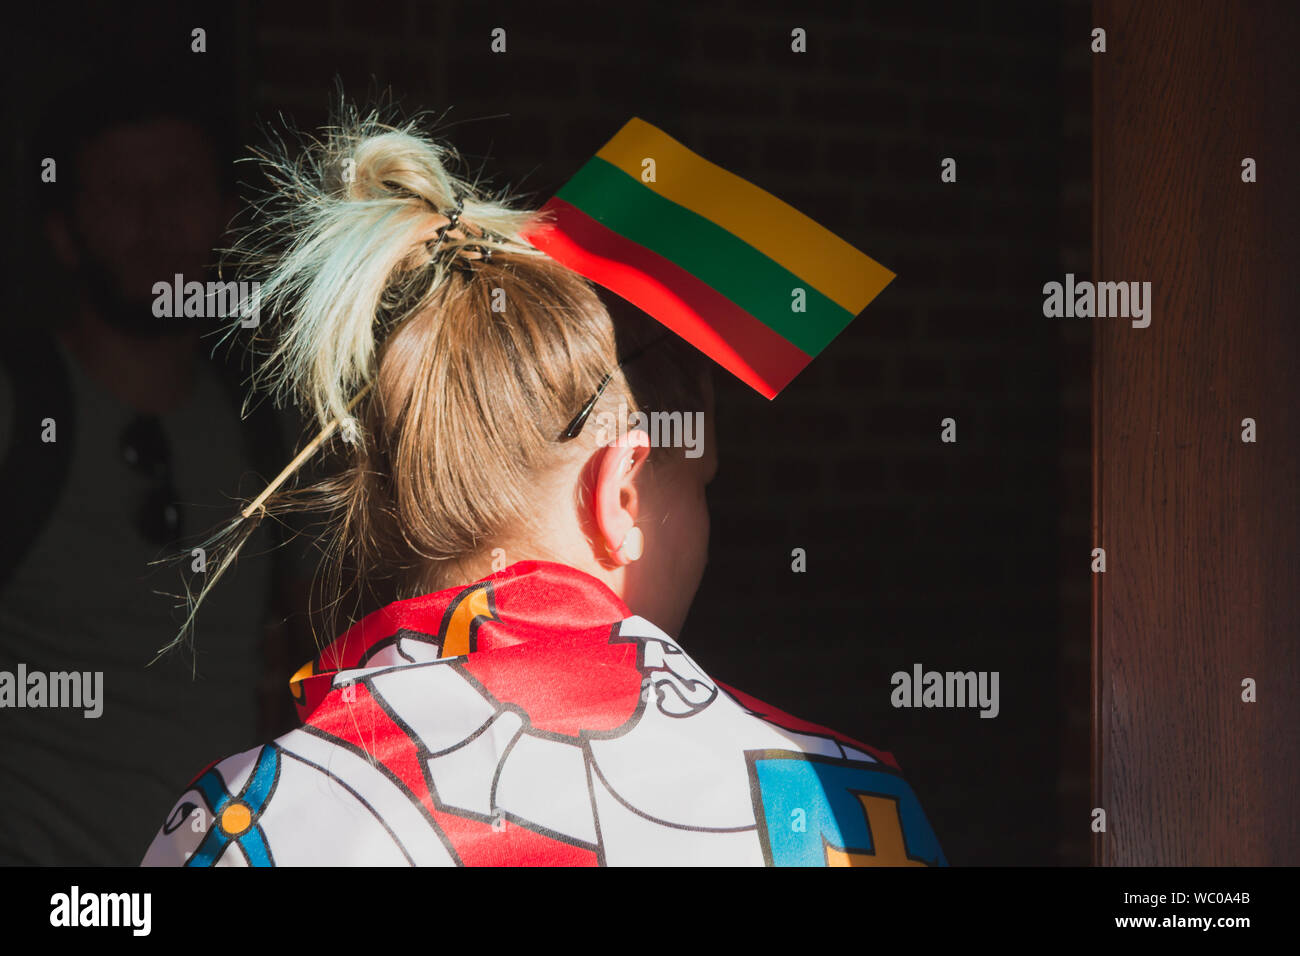 Young woman with sticked lithuanian flag in hairs Stock Photo